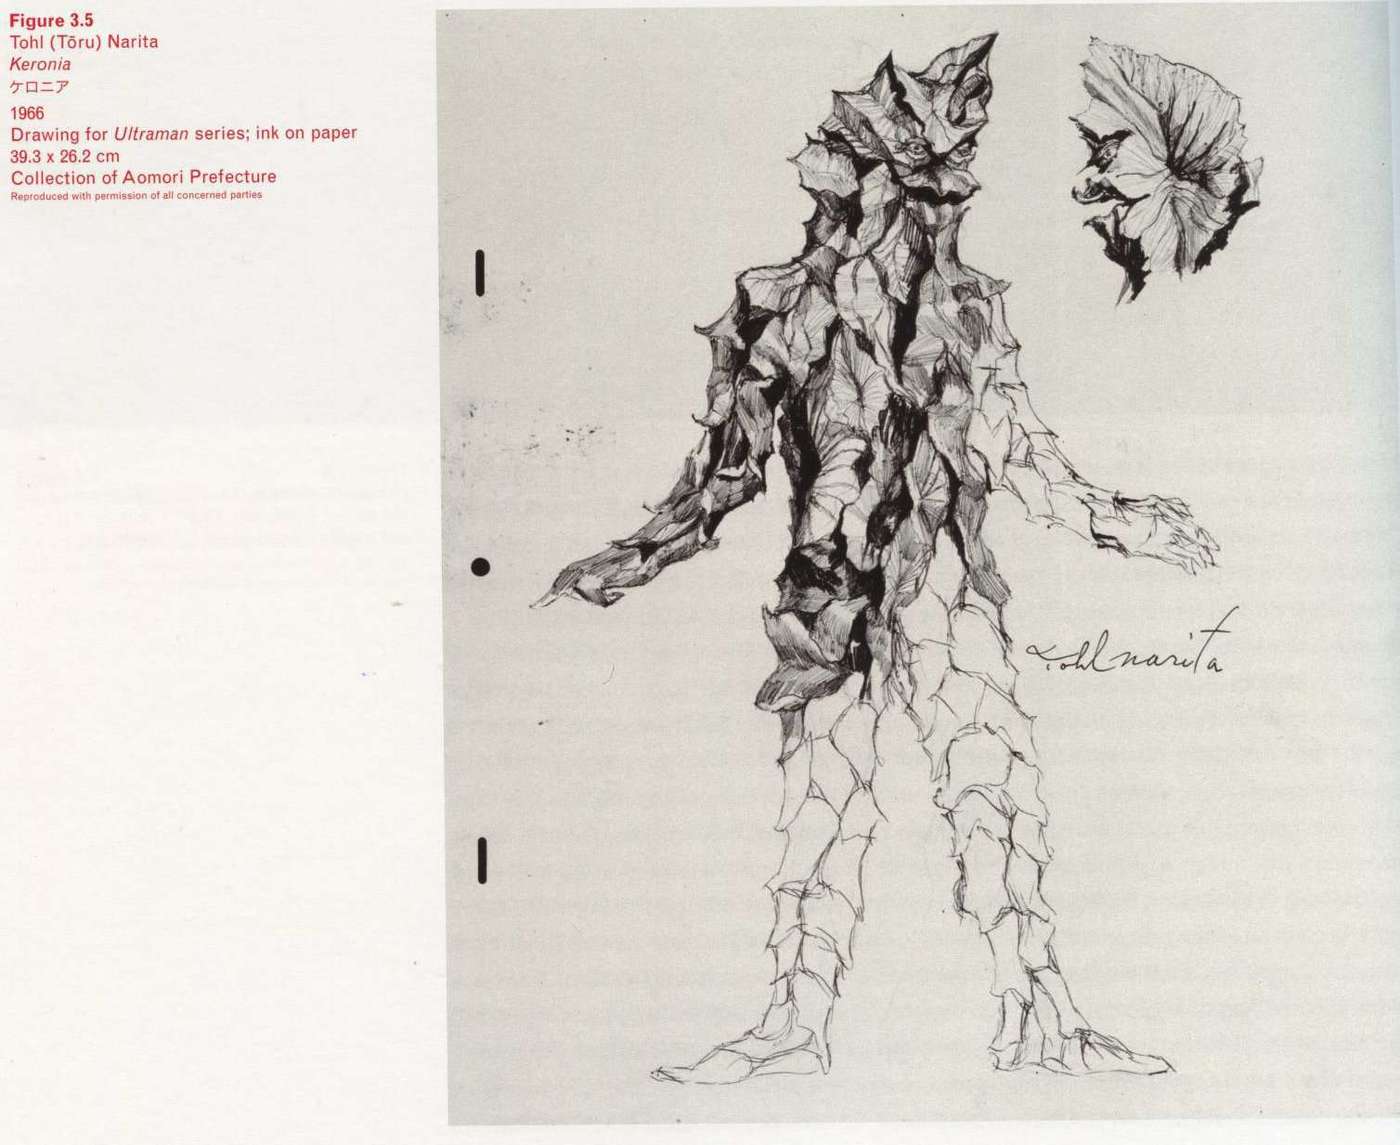 Caption left bottom: Tohl (Toru) Narita, Keronia, 1966, Drawing for Ultraman series; ink on paper, 39.3 × 26.2 cm, Collection of Aomori Prefecture